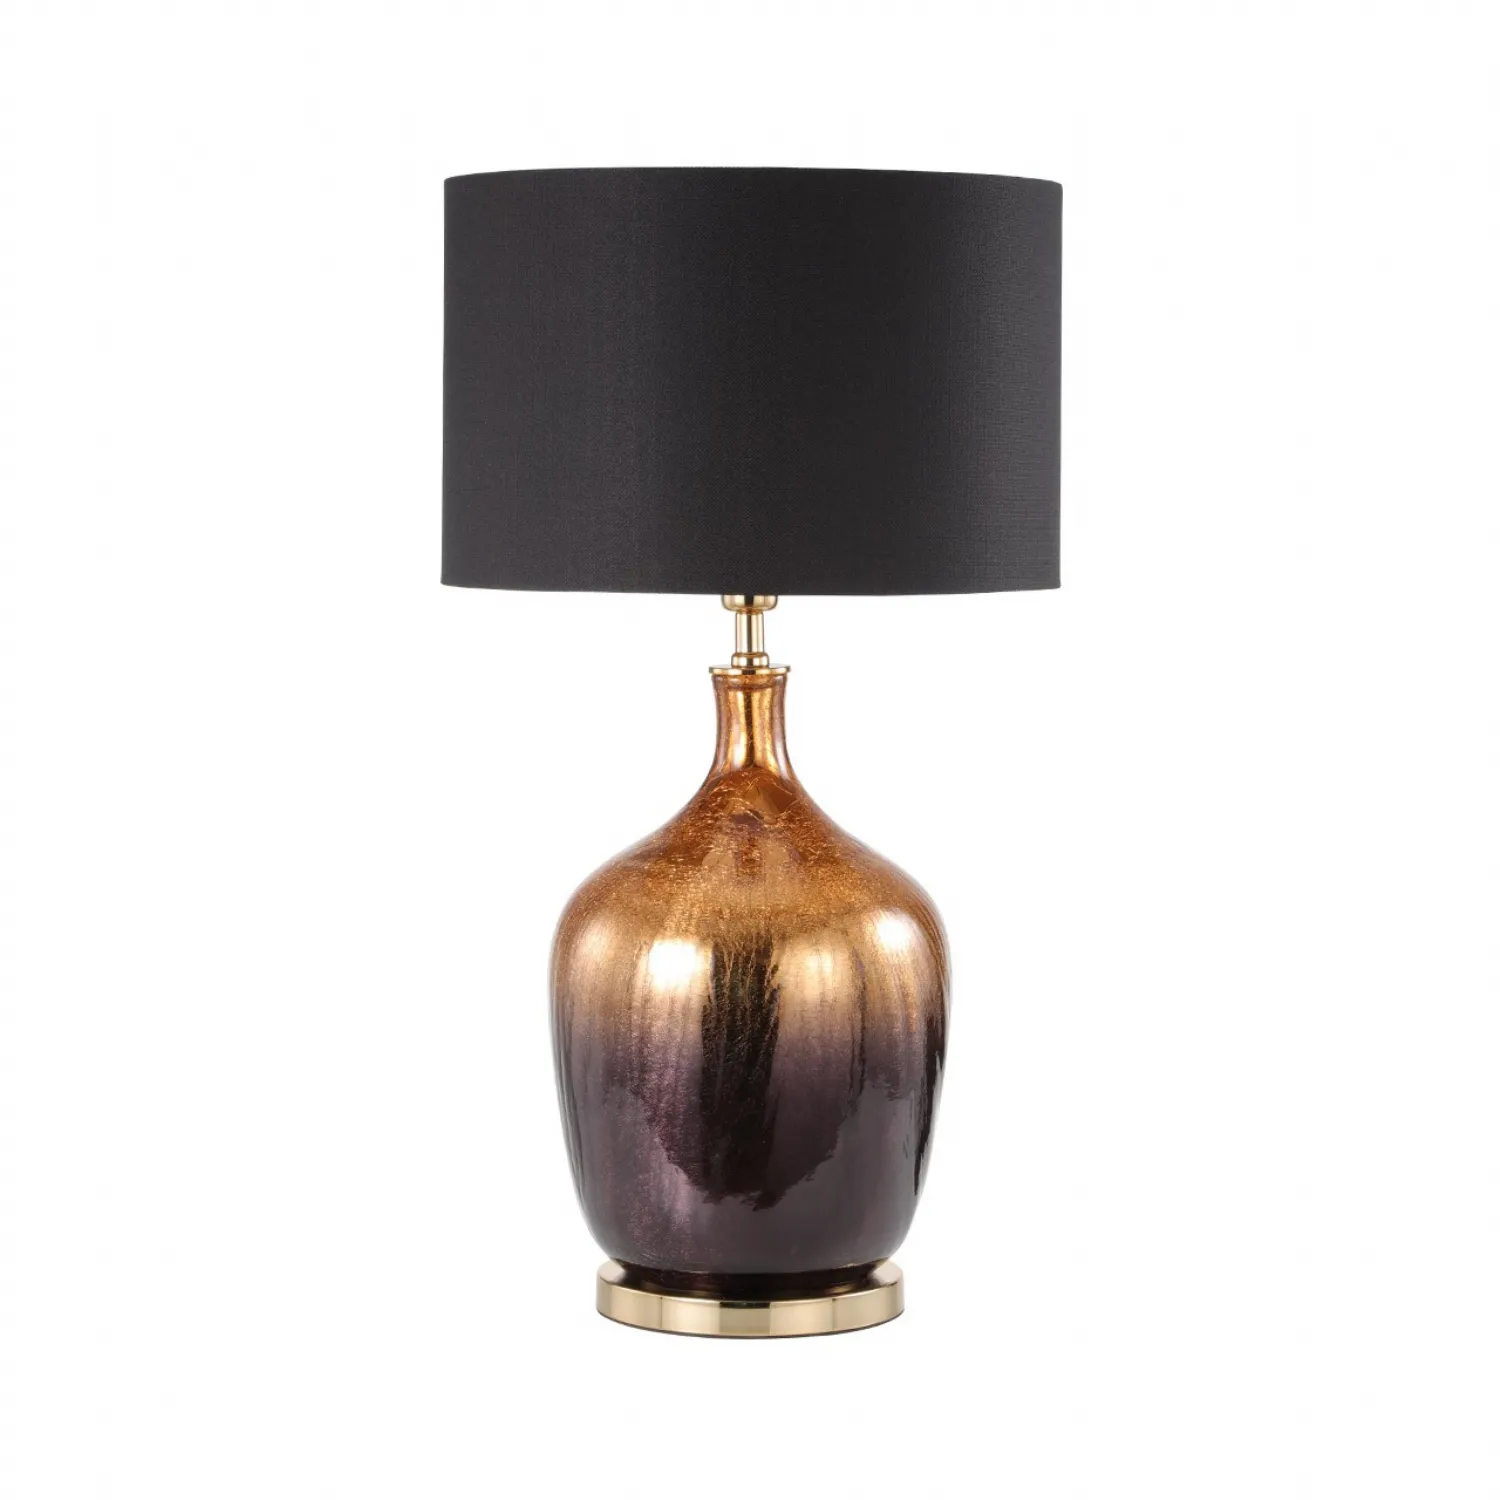 76cm Gold And Black Glass Table Lamp With Black Linen Shade